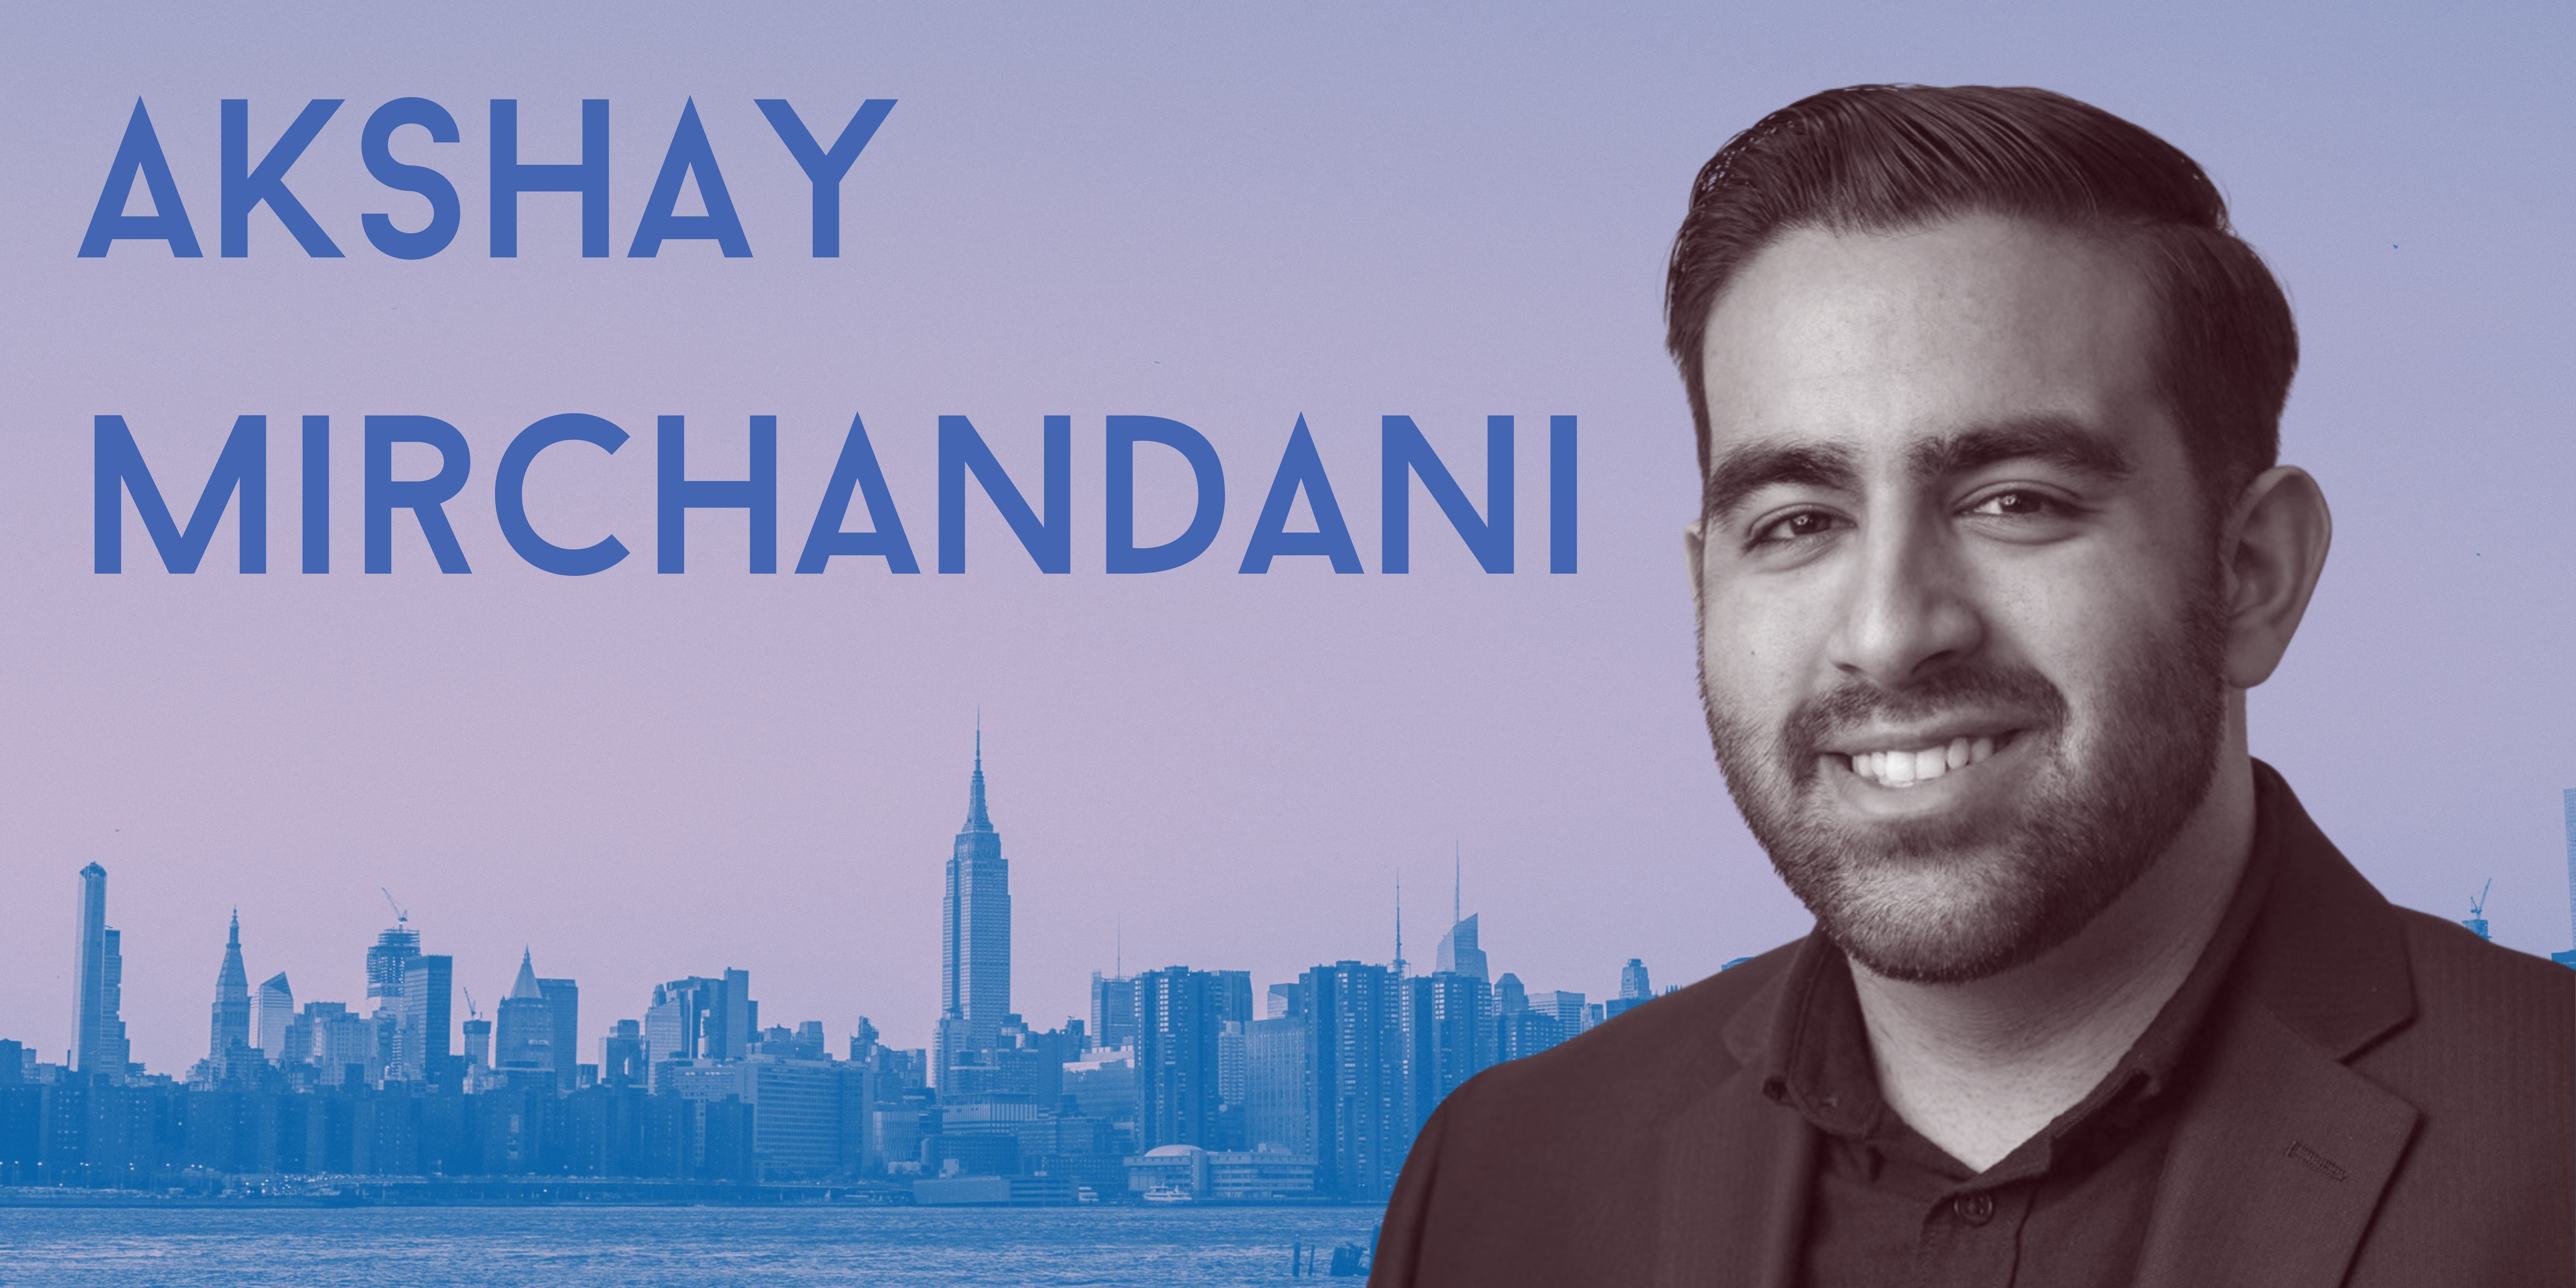 Photo of Akshay Mirchandani, head of audience development for Yahoo Sports, in front of a NYC skyline. At the top left is his name.